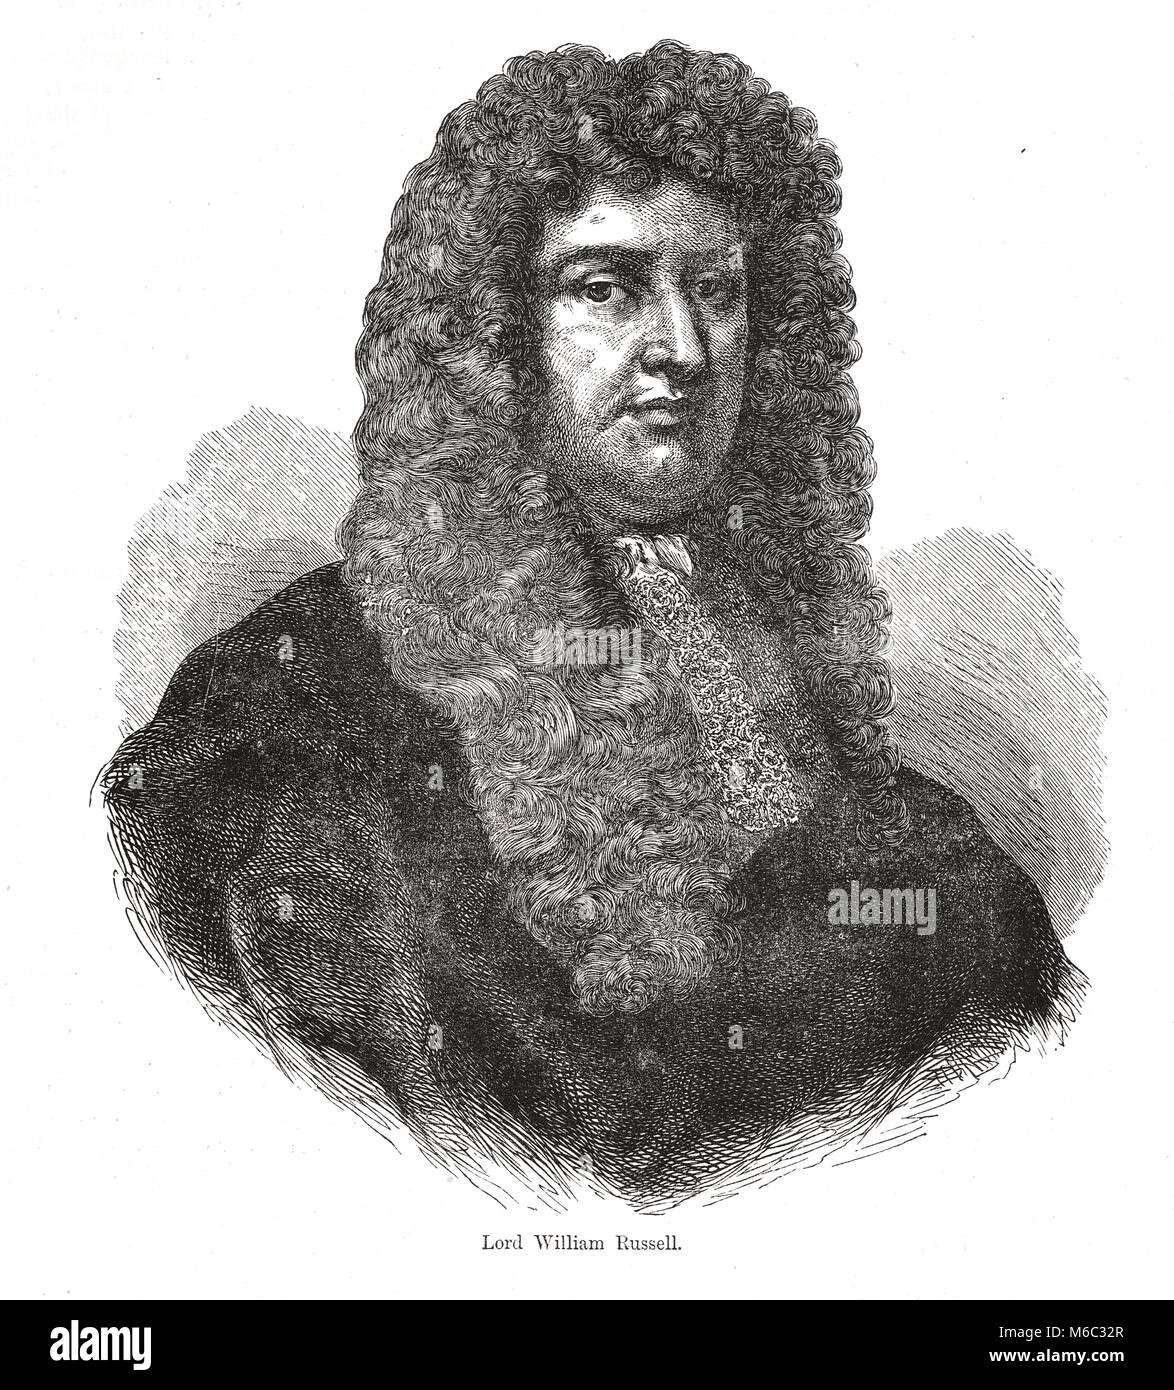 William Russell, lord Russell, 1639 - 1683 Banque D'Images